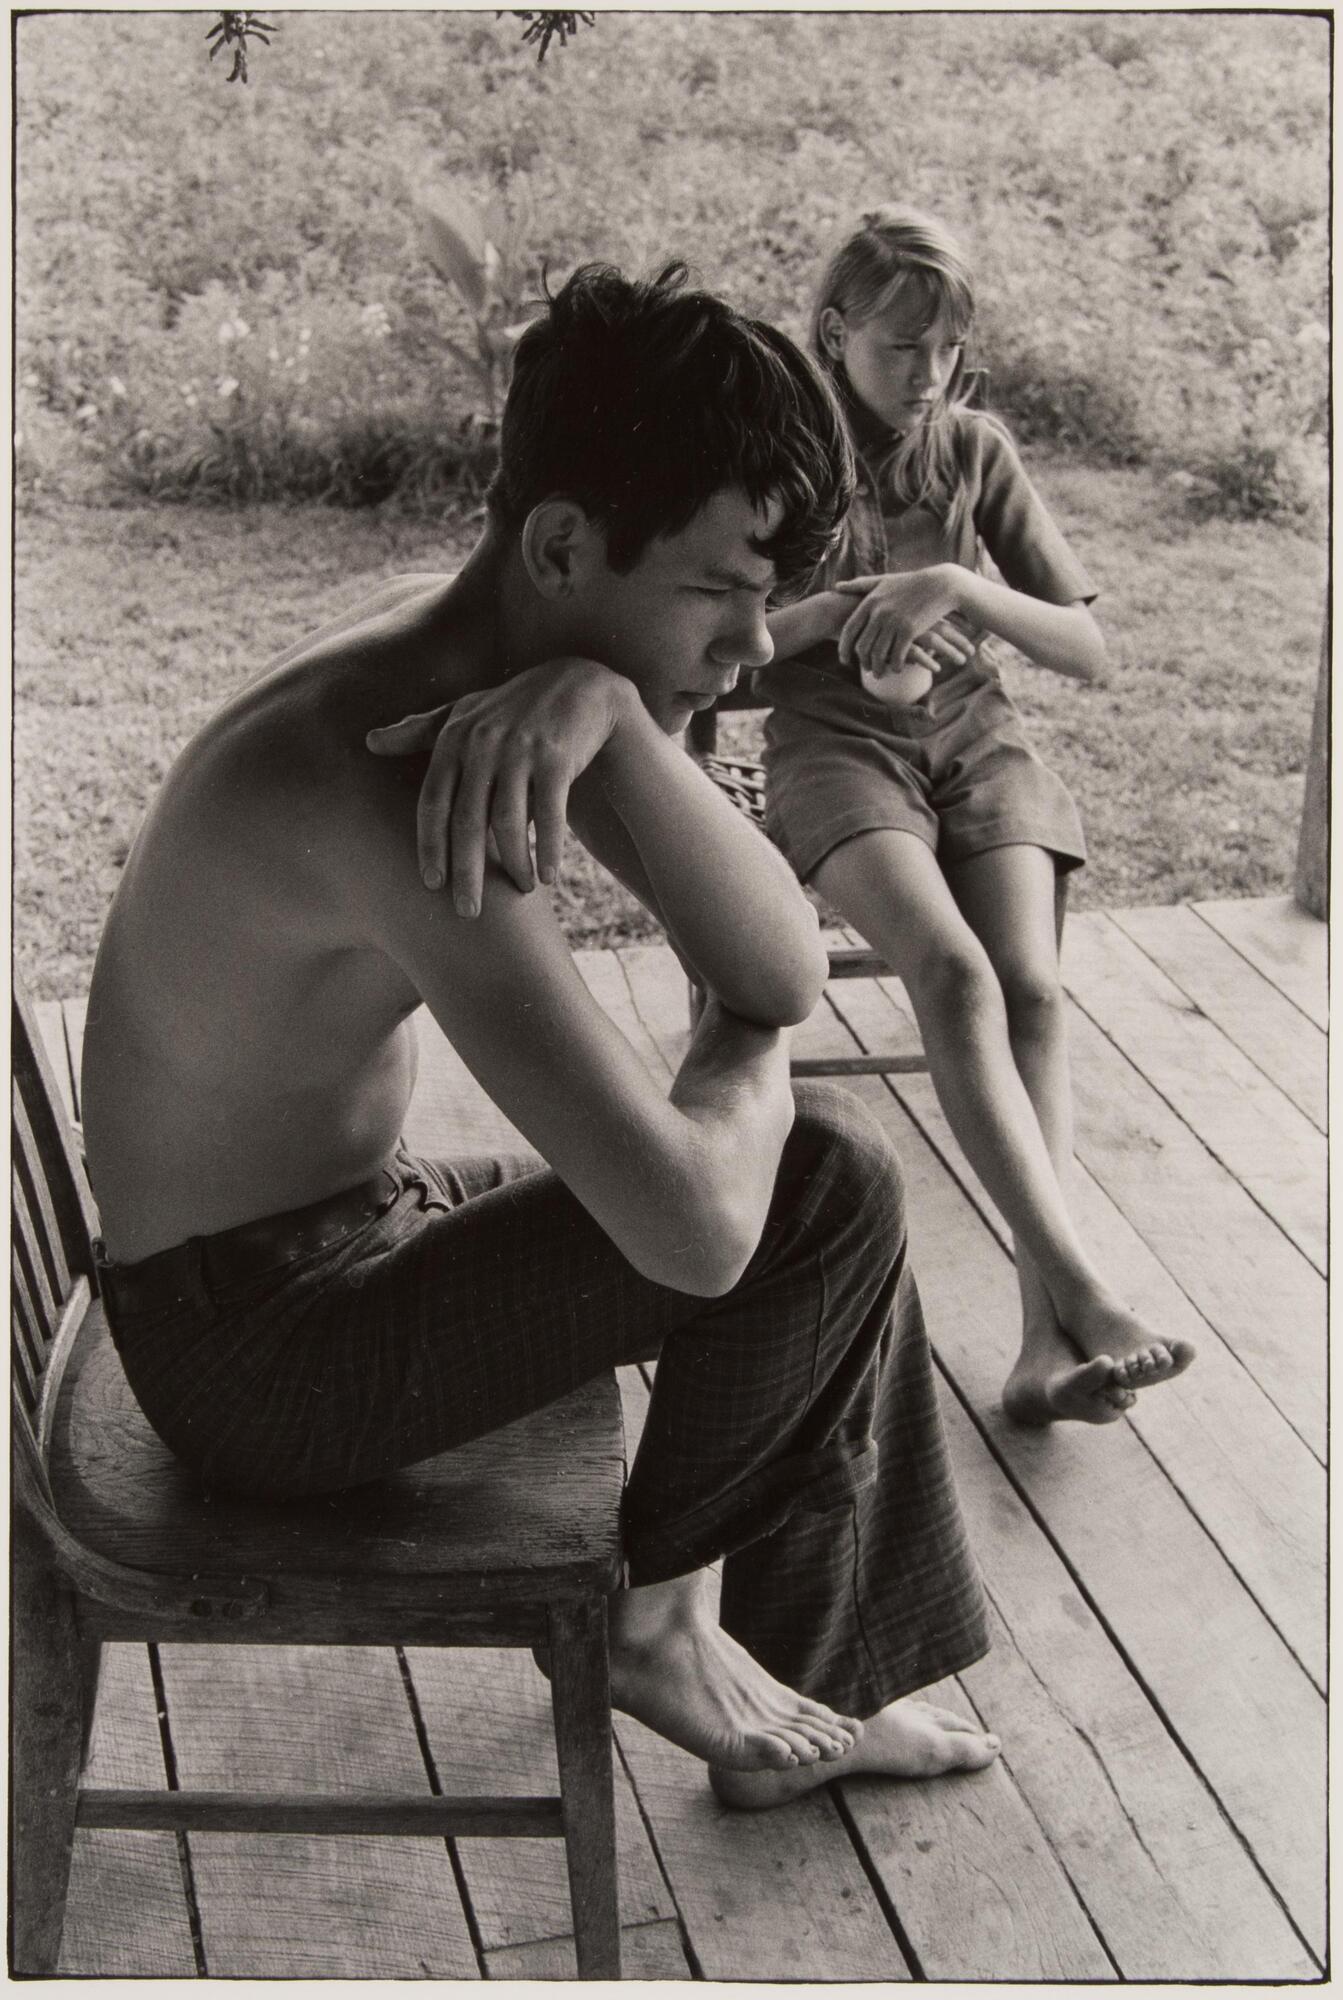 A boy and girl seated on wooden chairs on a porch The boy is shirtless and hunched over, the girl is barefoot.